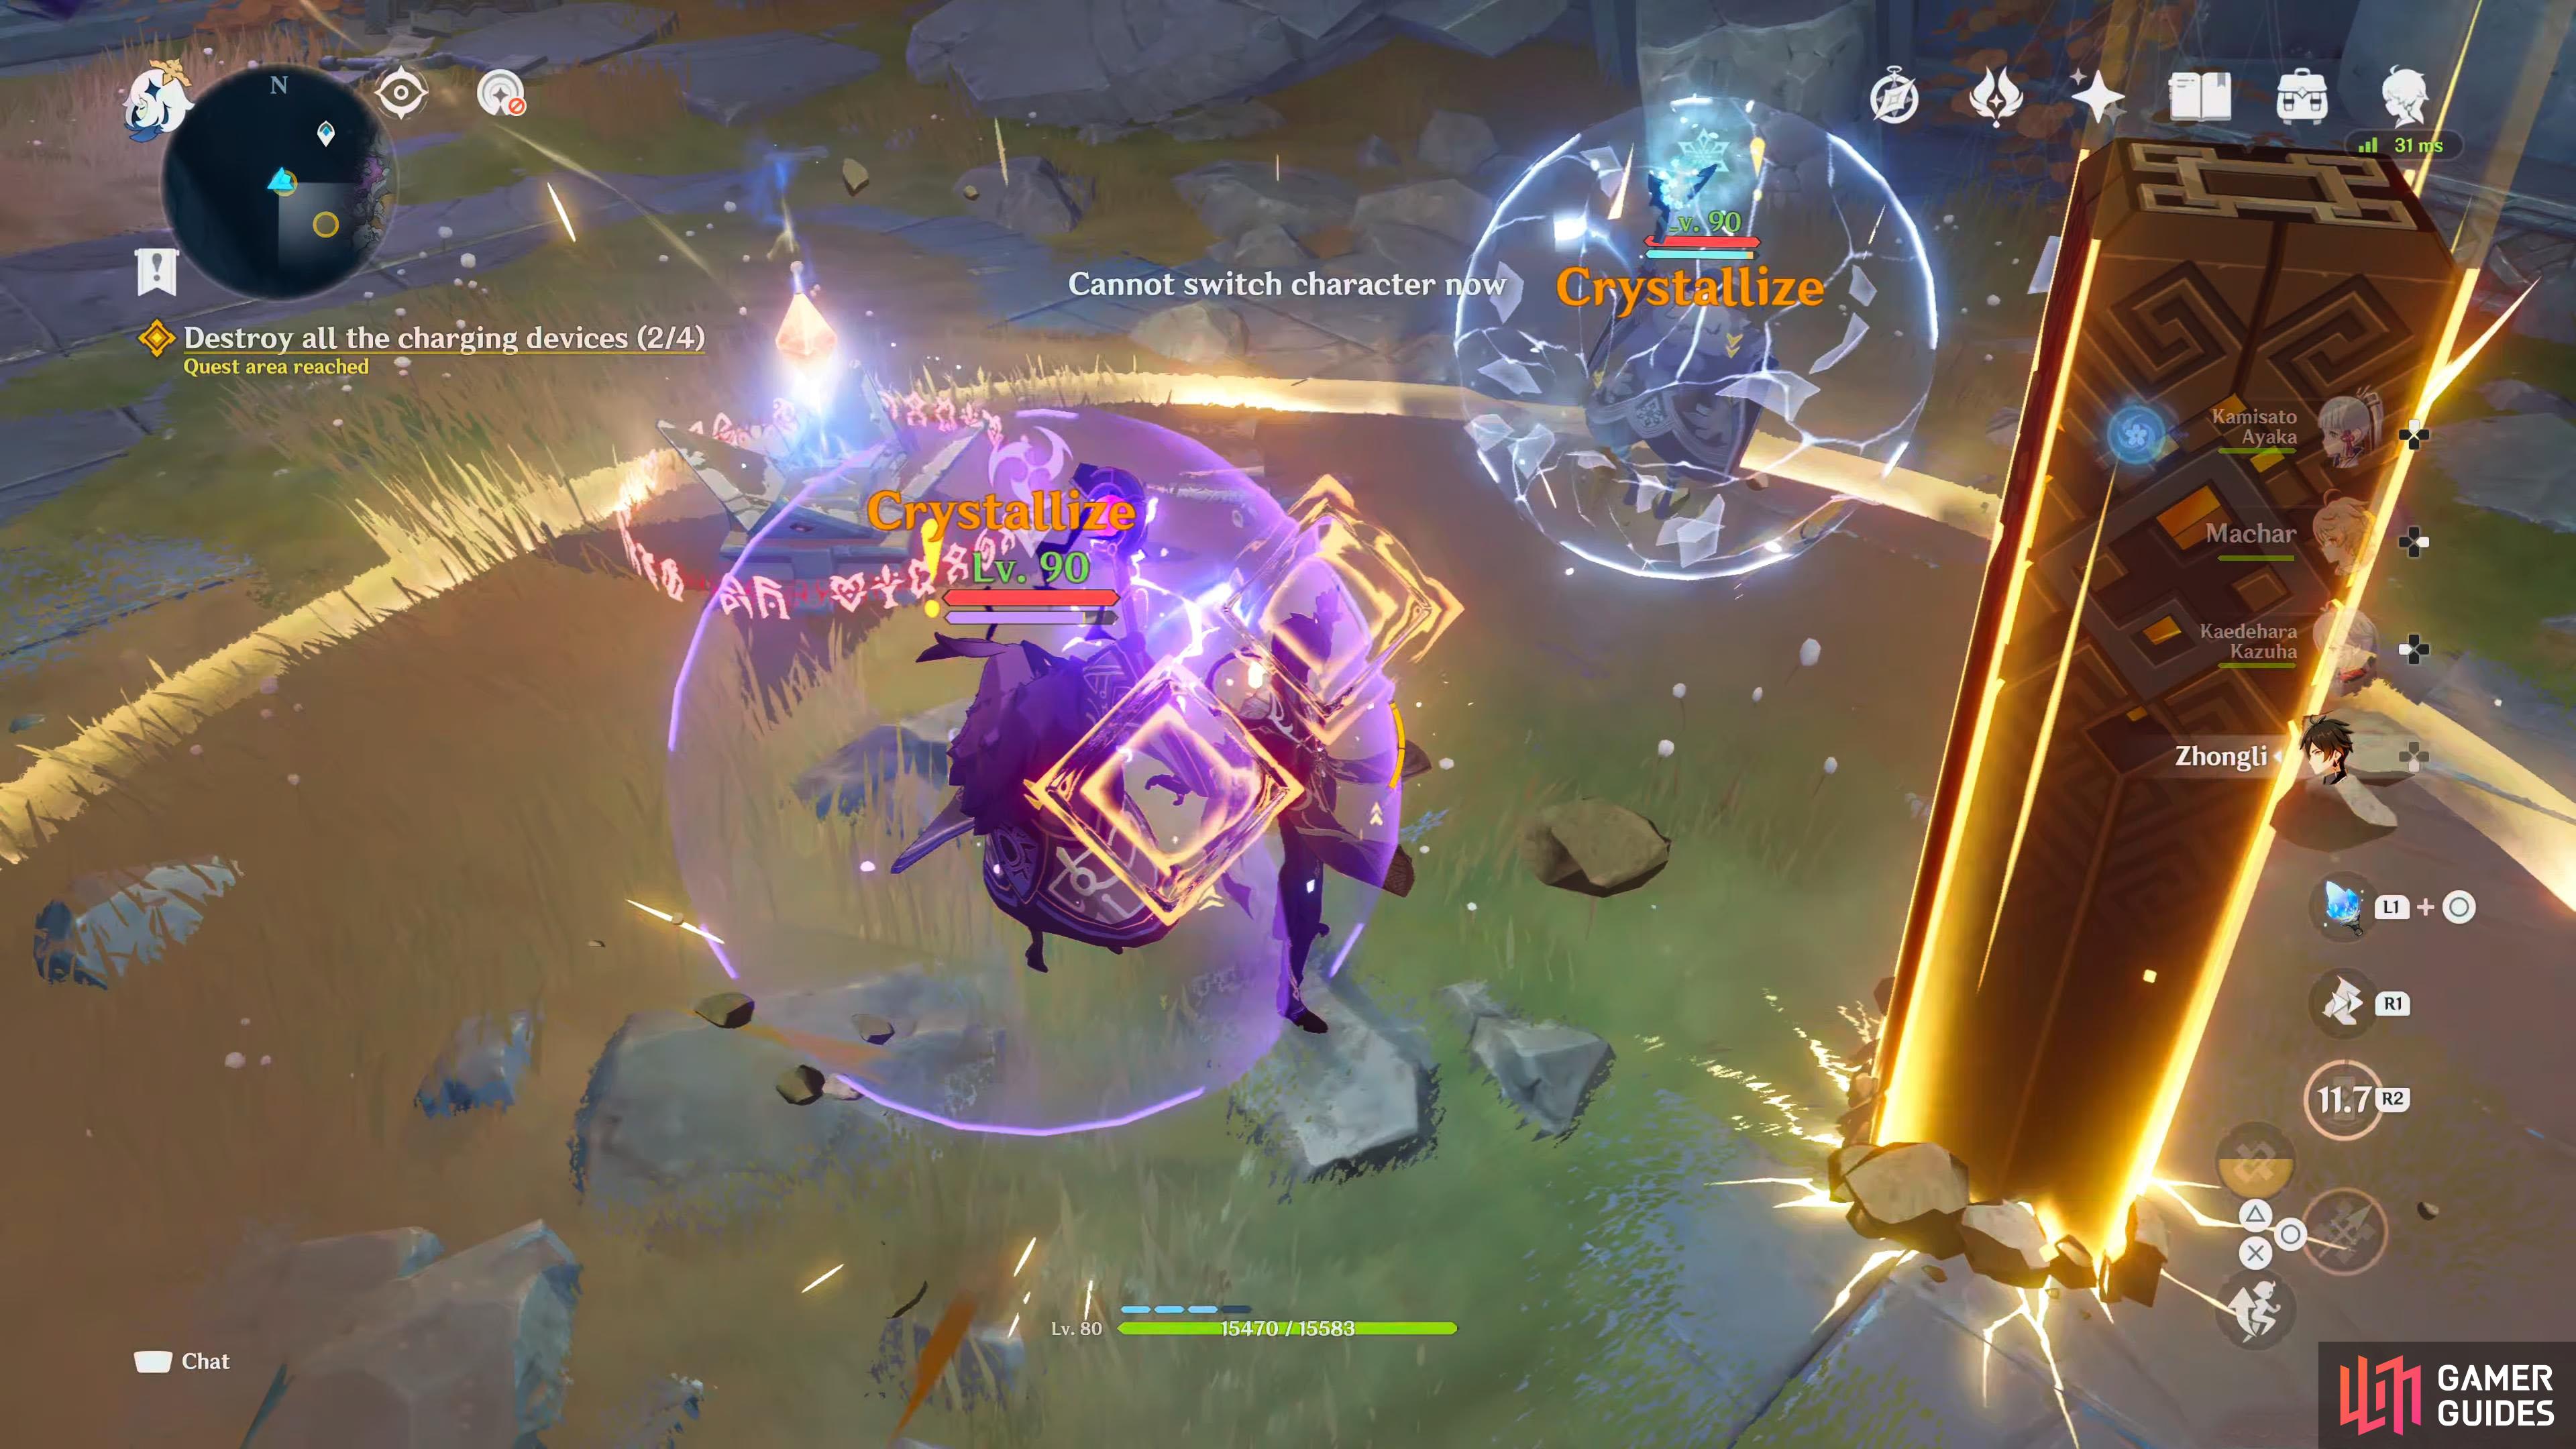 The west portal will have a Cryo Abyss Mage and an Electro Abyss Mage.